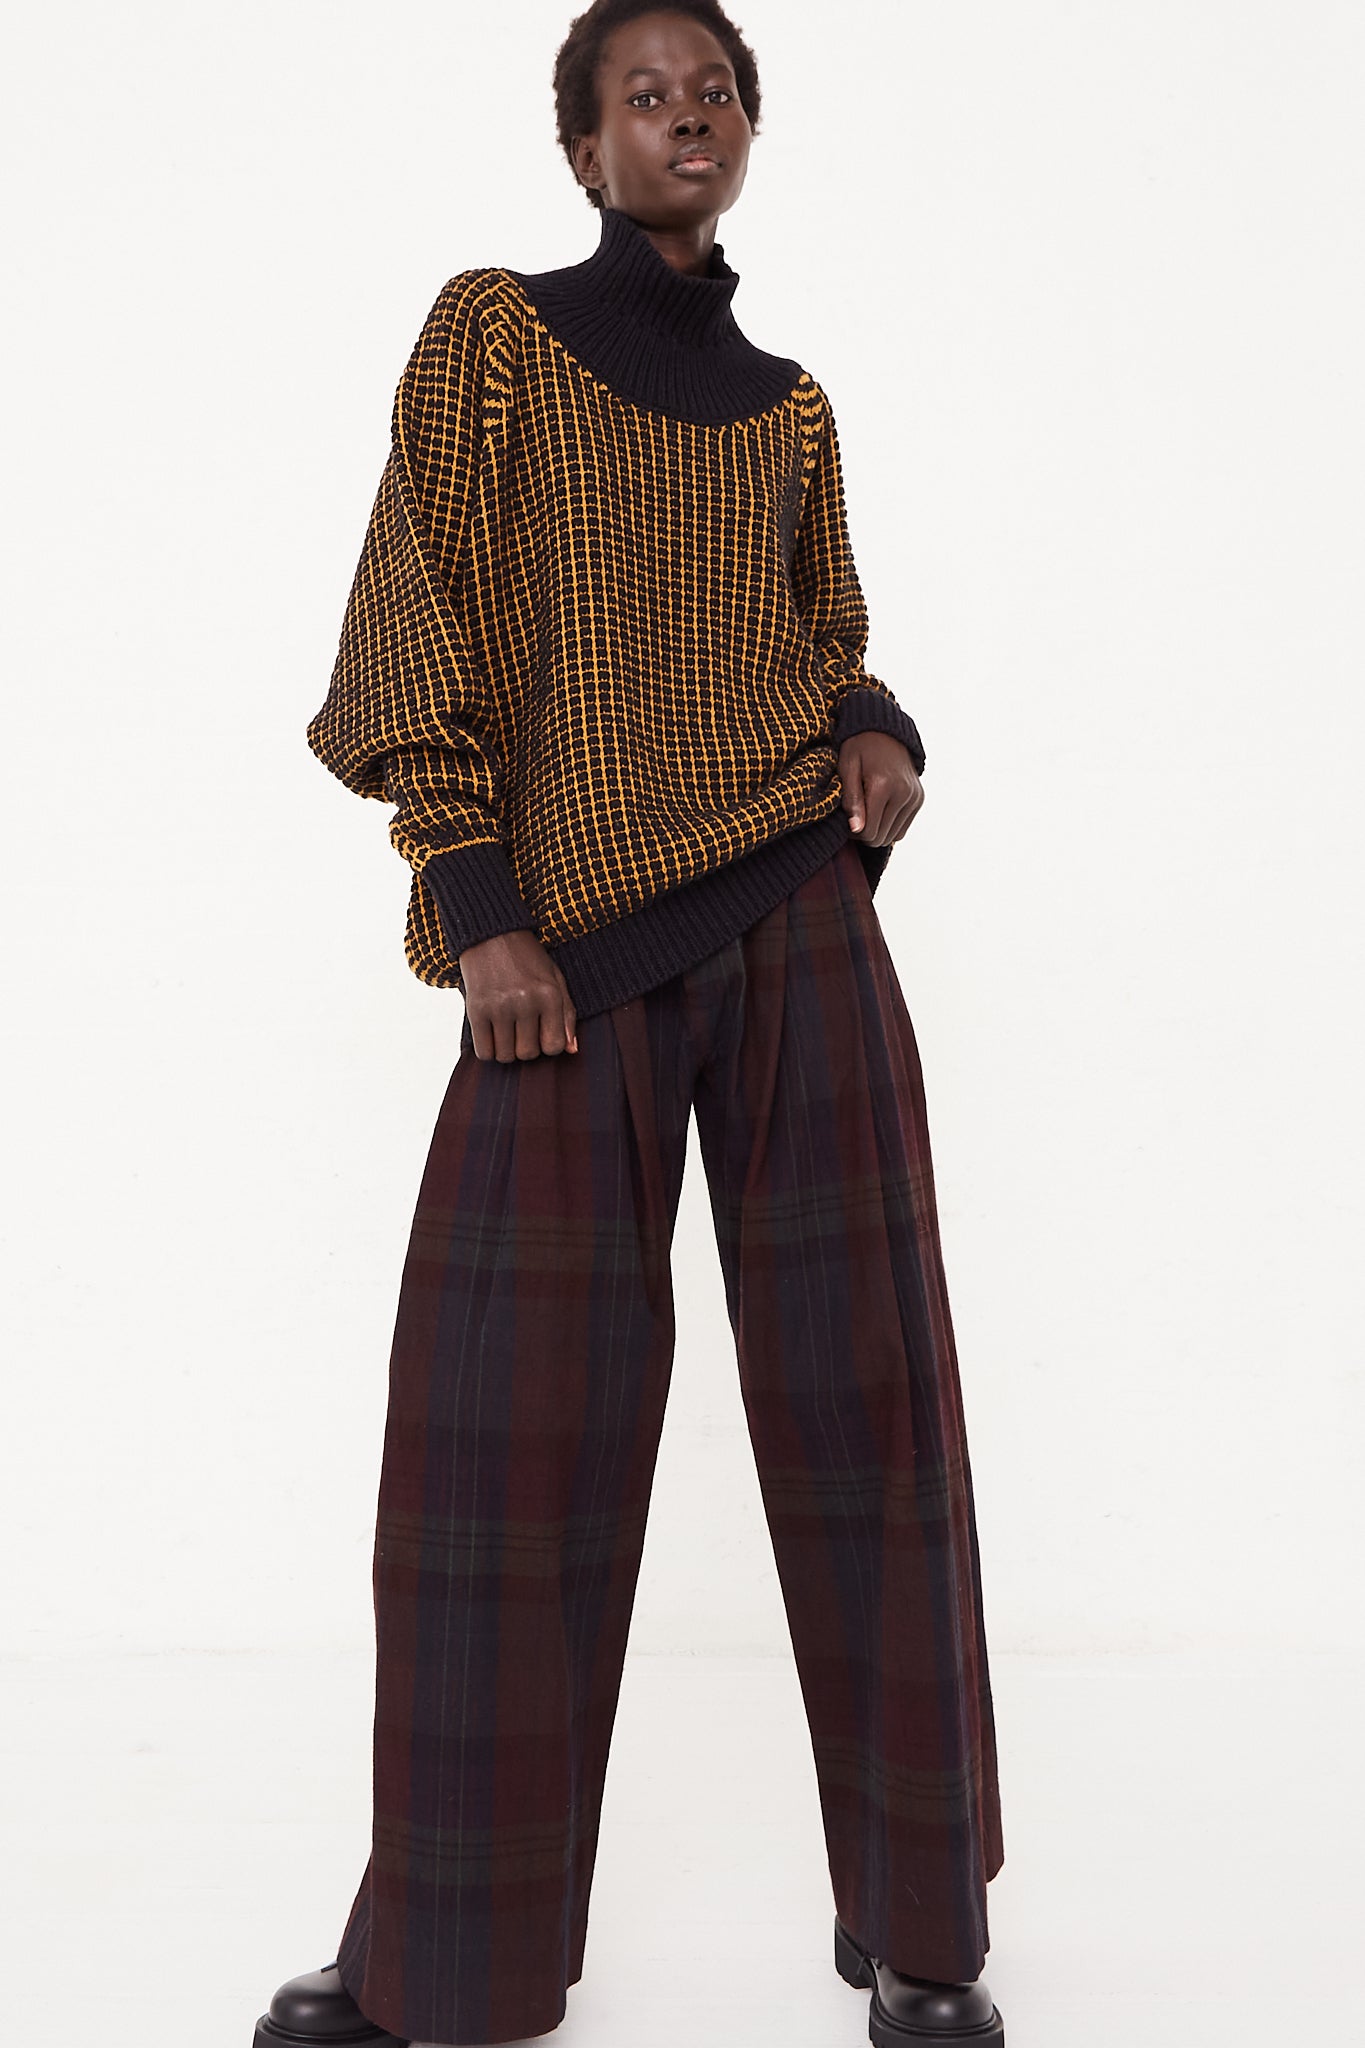 The model is wearing a black turtleneck sweater in Pitch Black Gold Lalin by Jan-Jan Van Essche and brown wide leg pants made of merino wool.